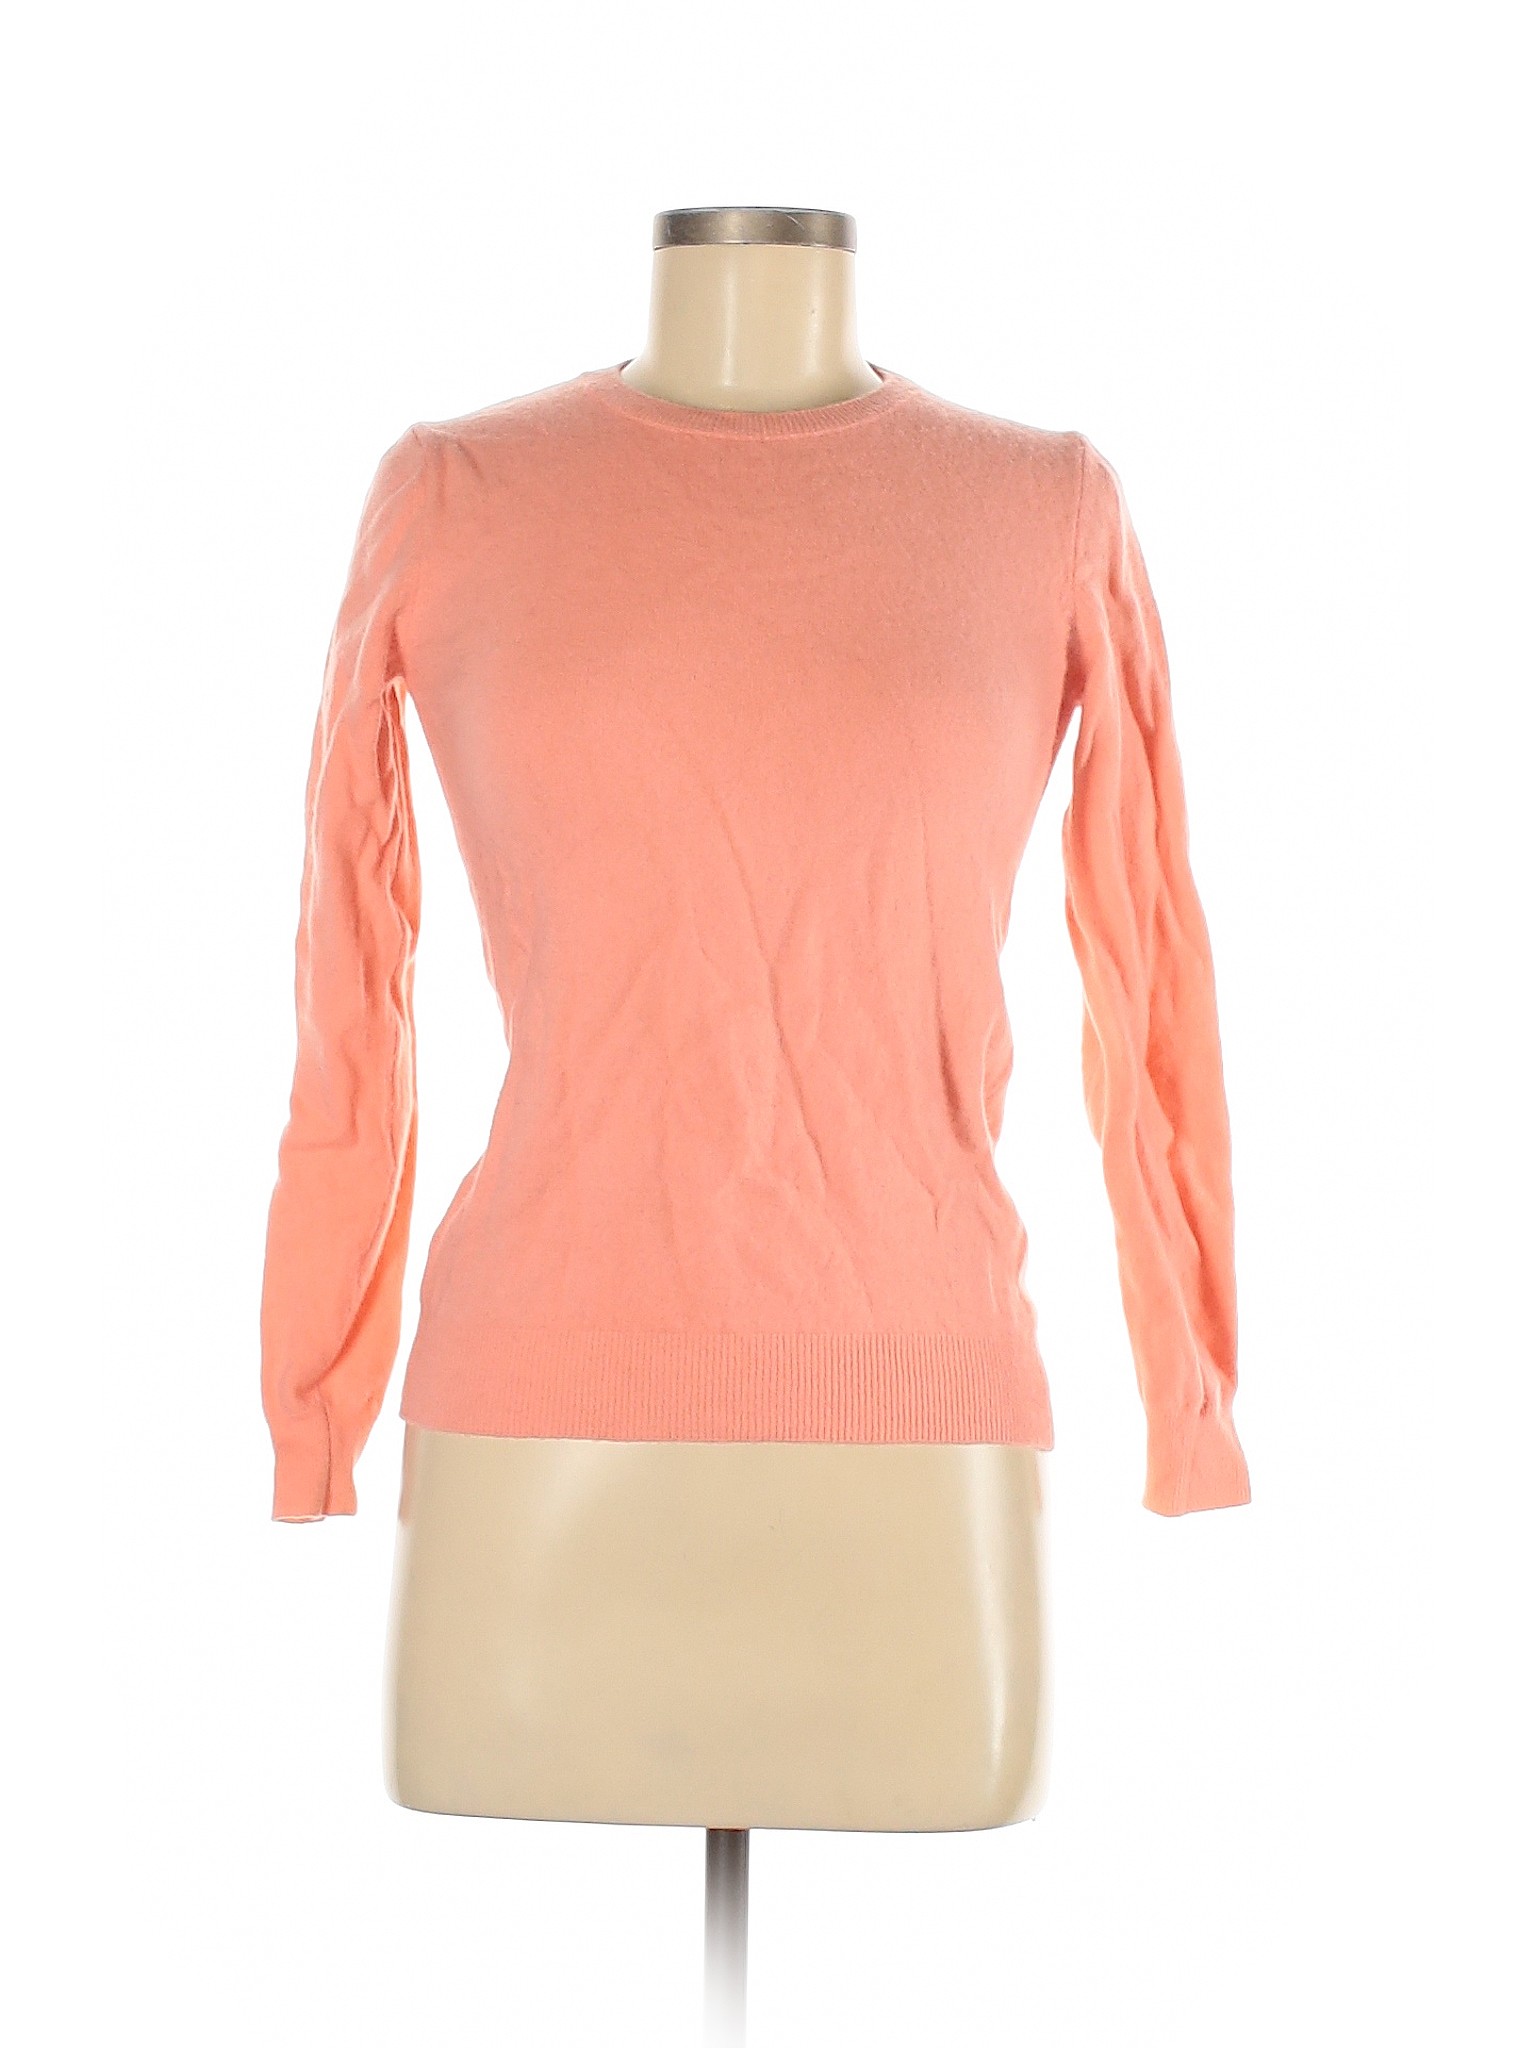 United Colors Of Benetton Women Pink Wool Pullover Sweater M | eBay